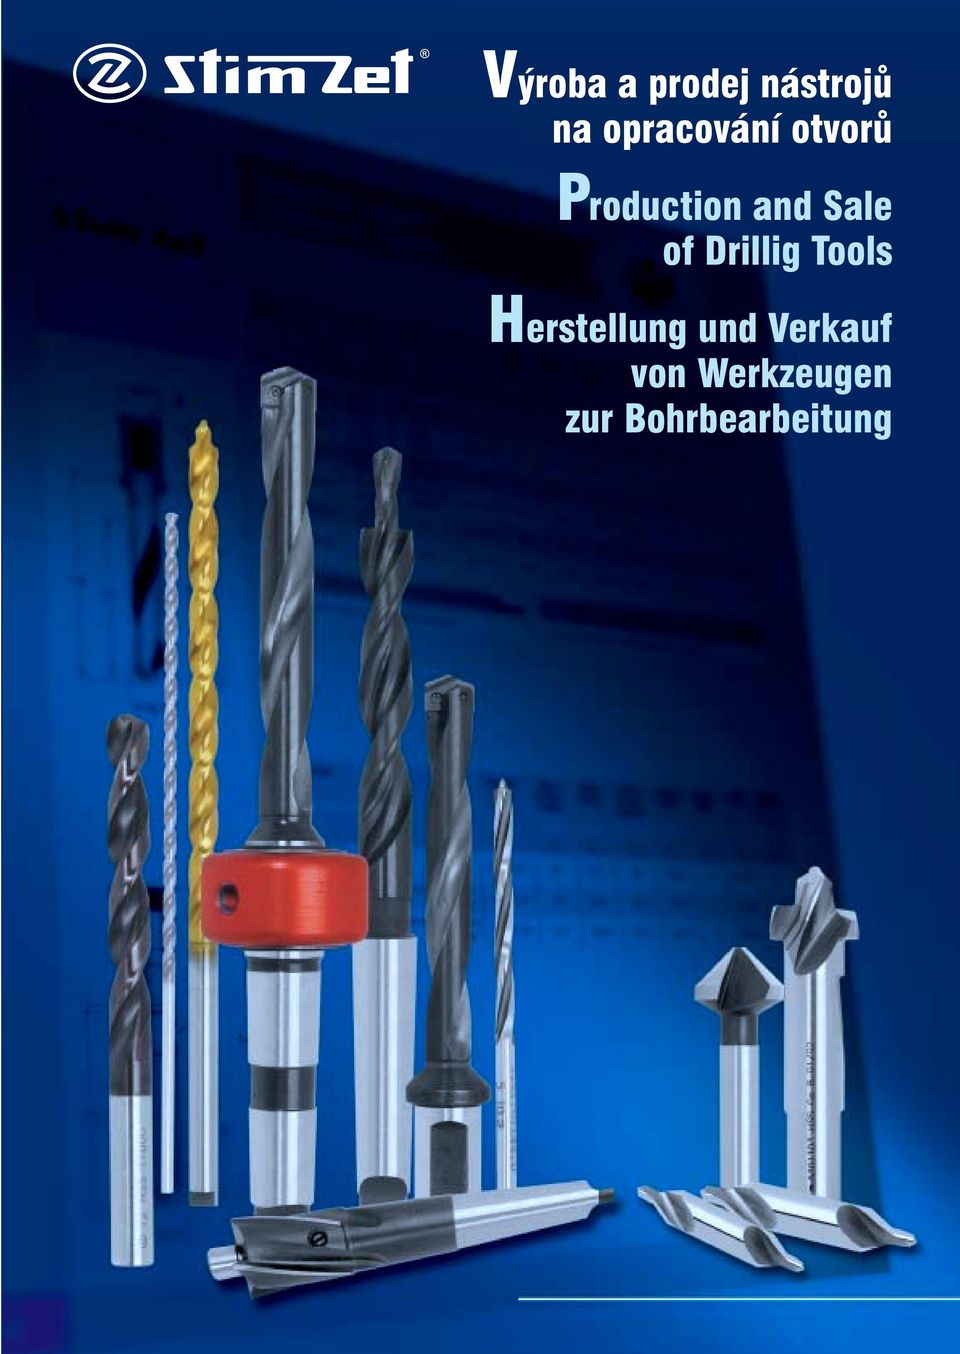 Sale of Drillig Tools Herstellung